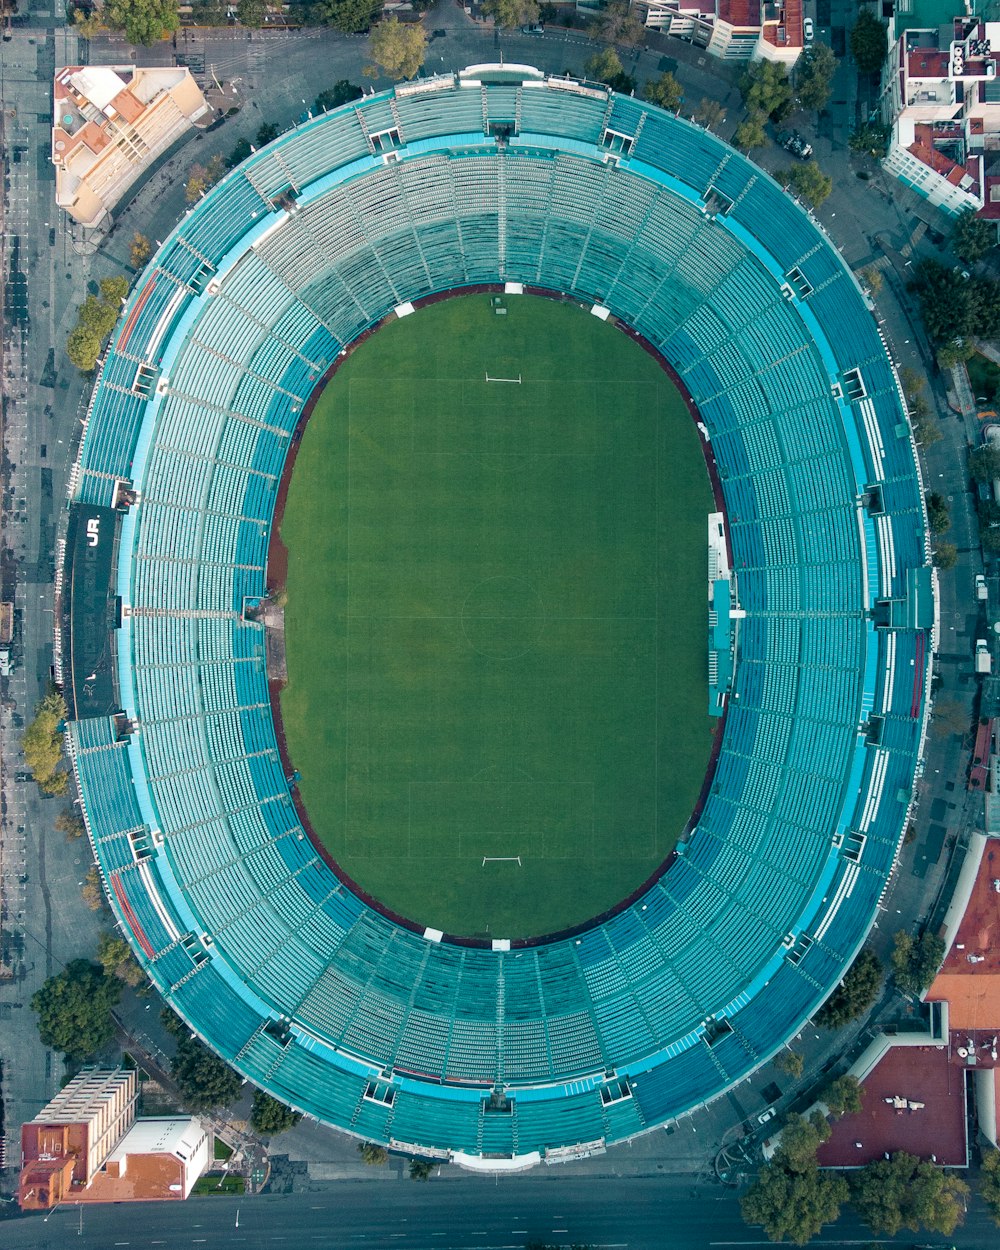 an aerial view of a stadium with a green field